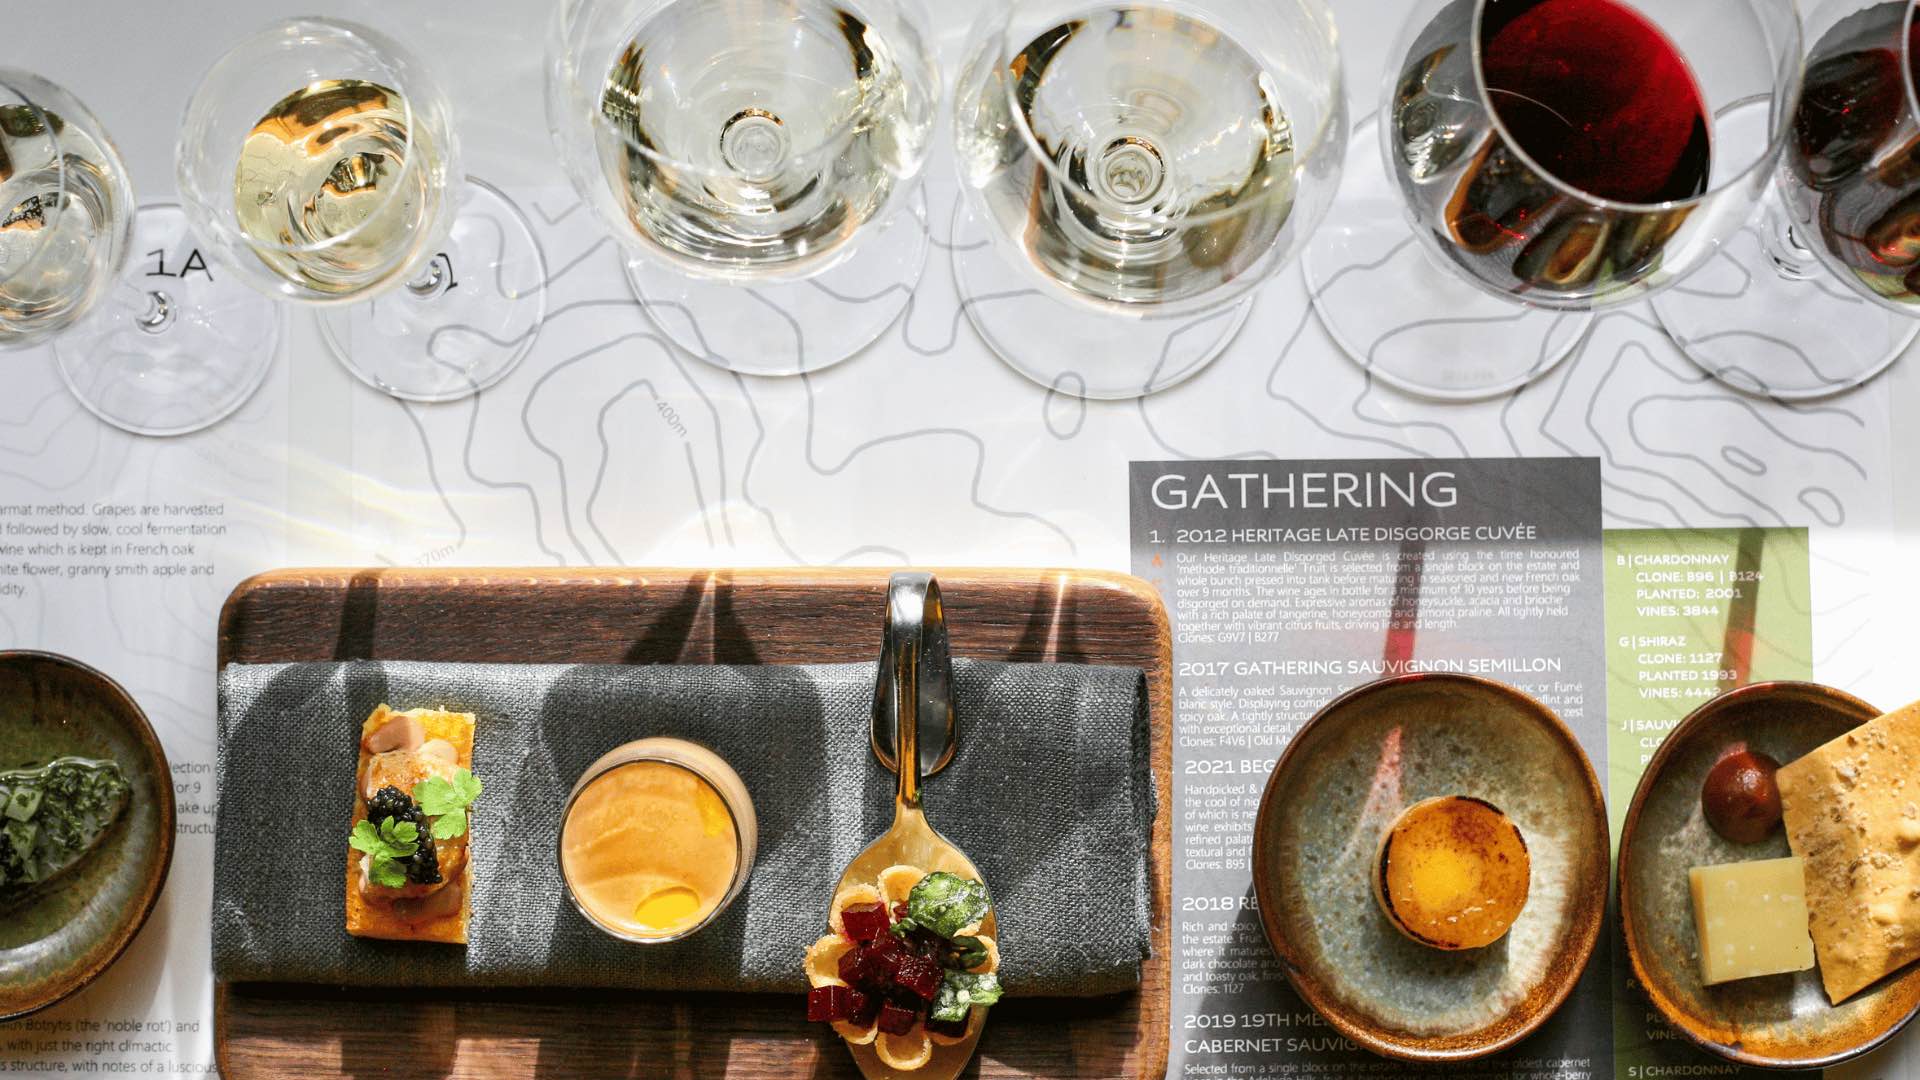 Wine pairings and amuse-bouches served at the Gathering Experience.